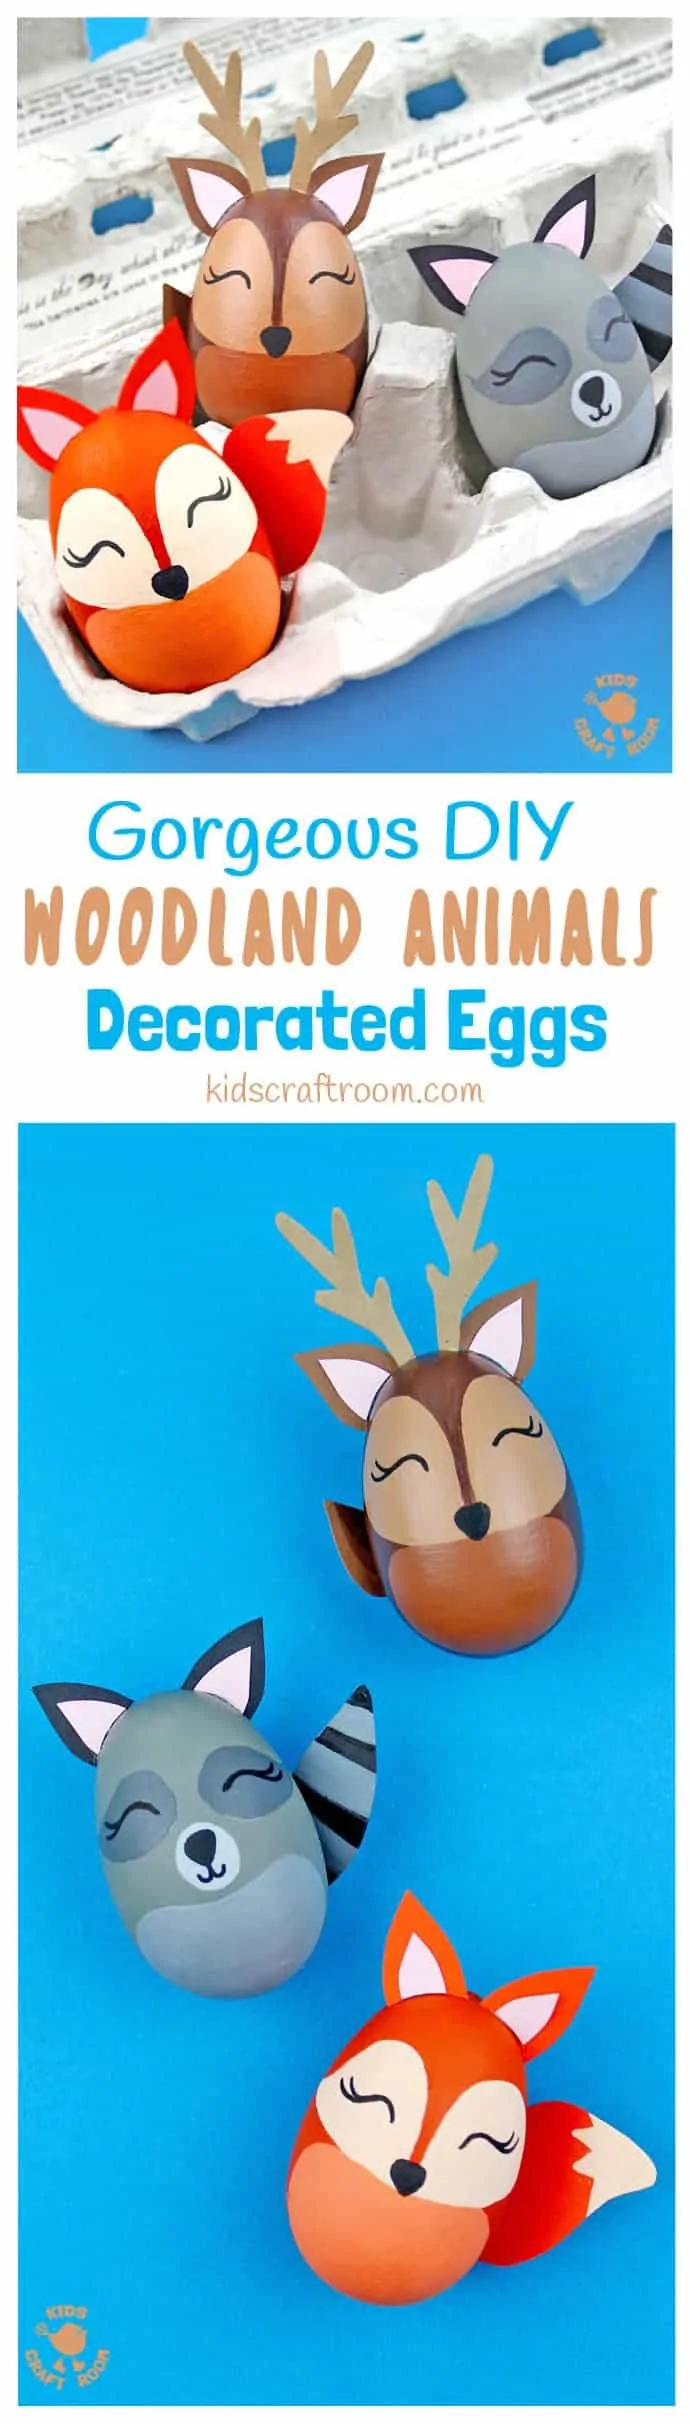 WOODLAND ANIMAL DECORATED EGGS - If you're looking for some special Easter egg decorating ideas then these Gorgeous Woodland Animal Easter Eggs are perfect. This set of Easter egg animal designs look amazing and are surprisingly easy to make. There's a stunning egg fox, raccoon and deer, all so adorable! #Easter #eastereggs #woodlandanimals #eggs #eastercrafts #easterdecorations #paintedeggs #animalcrafts #kidscrafts #easterideas #easteractivities #forestanimals #eggdecorating